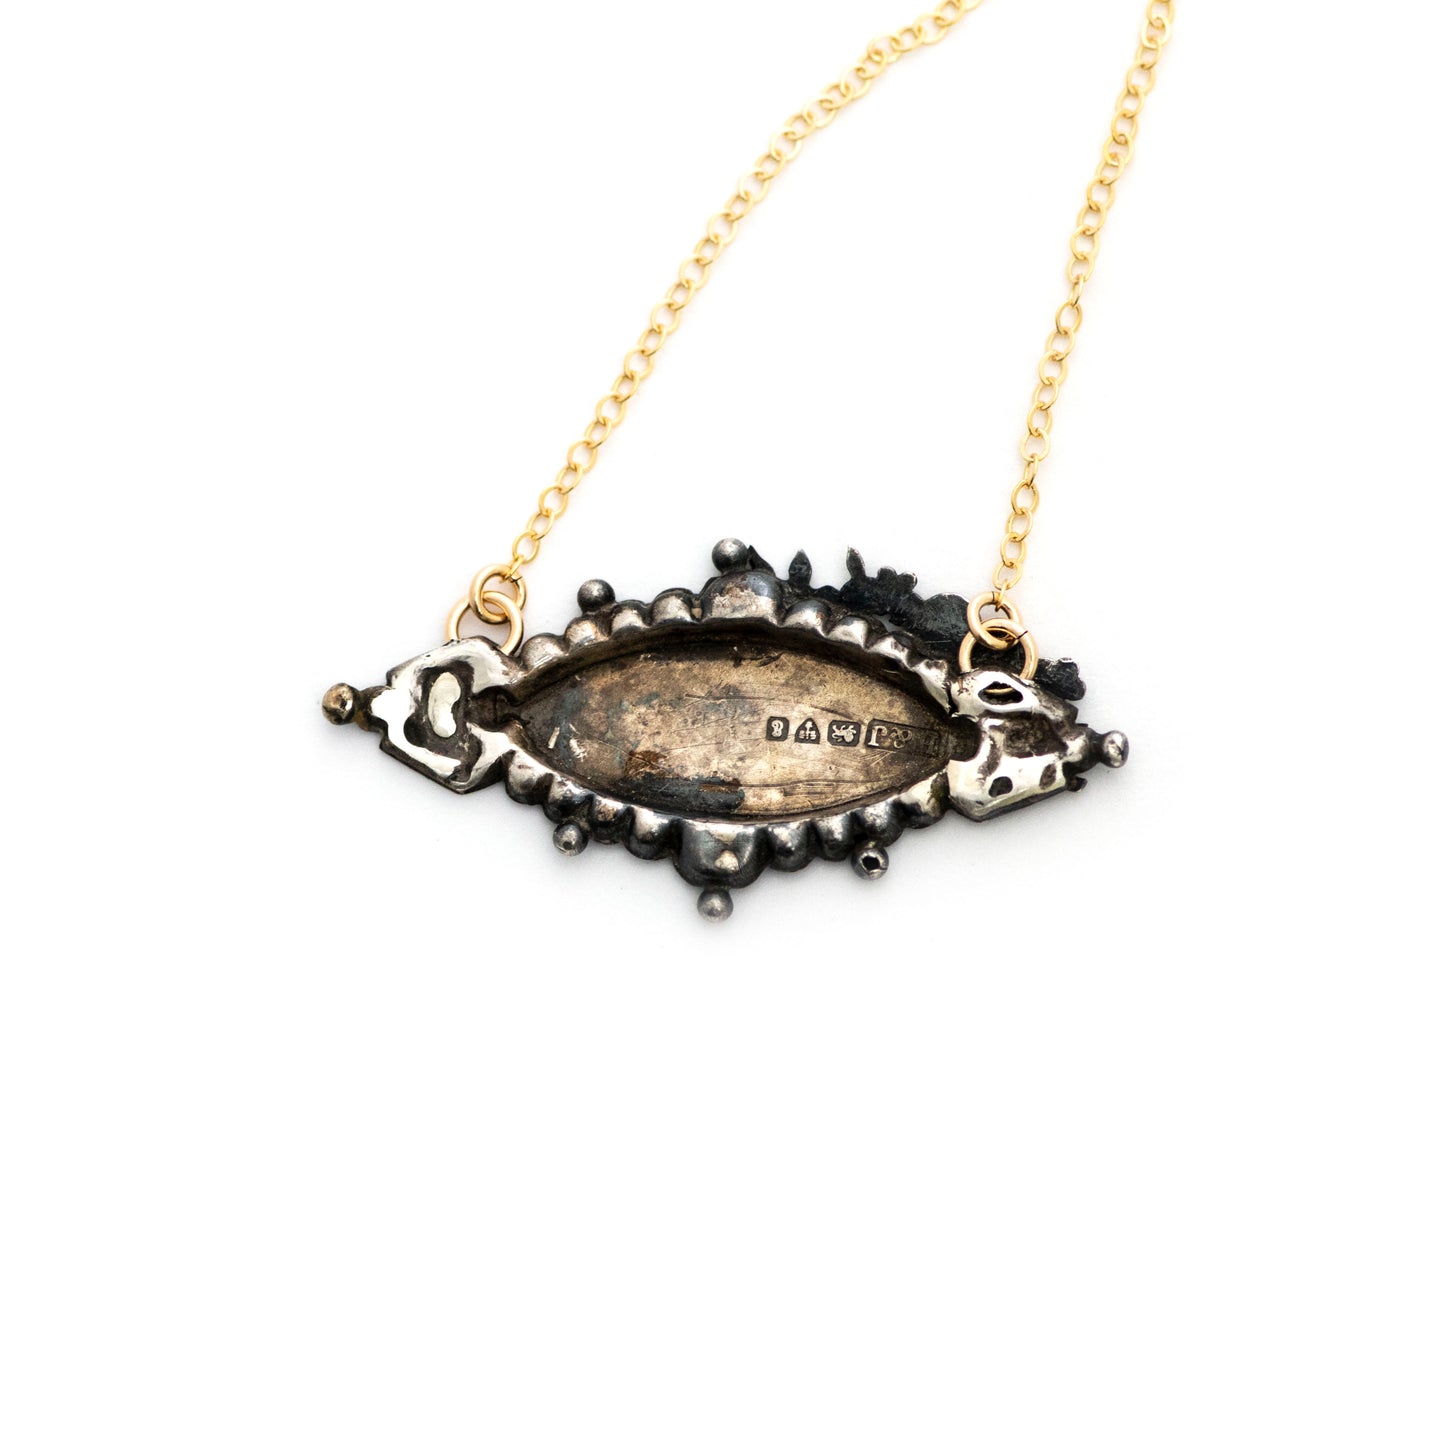 This one-of-a-kind conversion necklace is made up of:  Sterling silver Victorian brooch pendant from the late 1800s with hand tooled details and gold filled letters spelling "LOUIE". Birmingham hallmarks on the back.